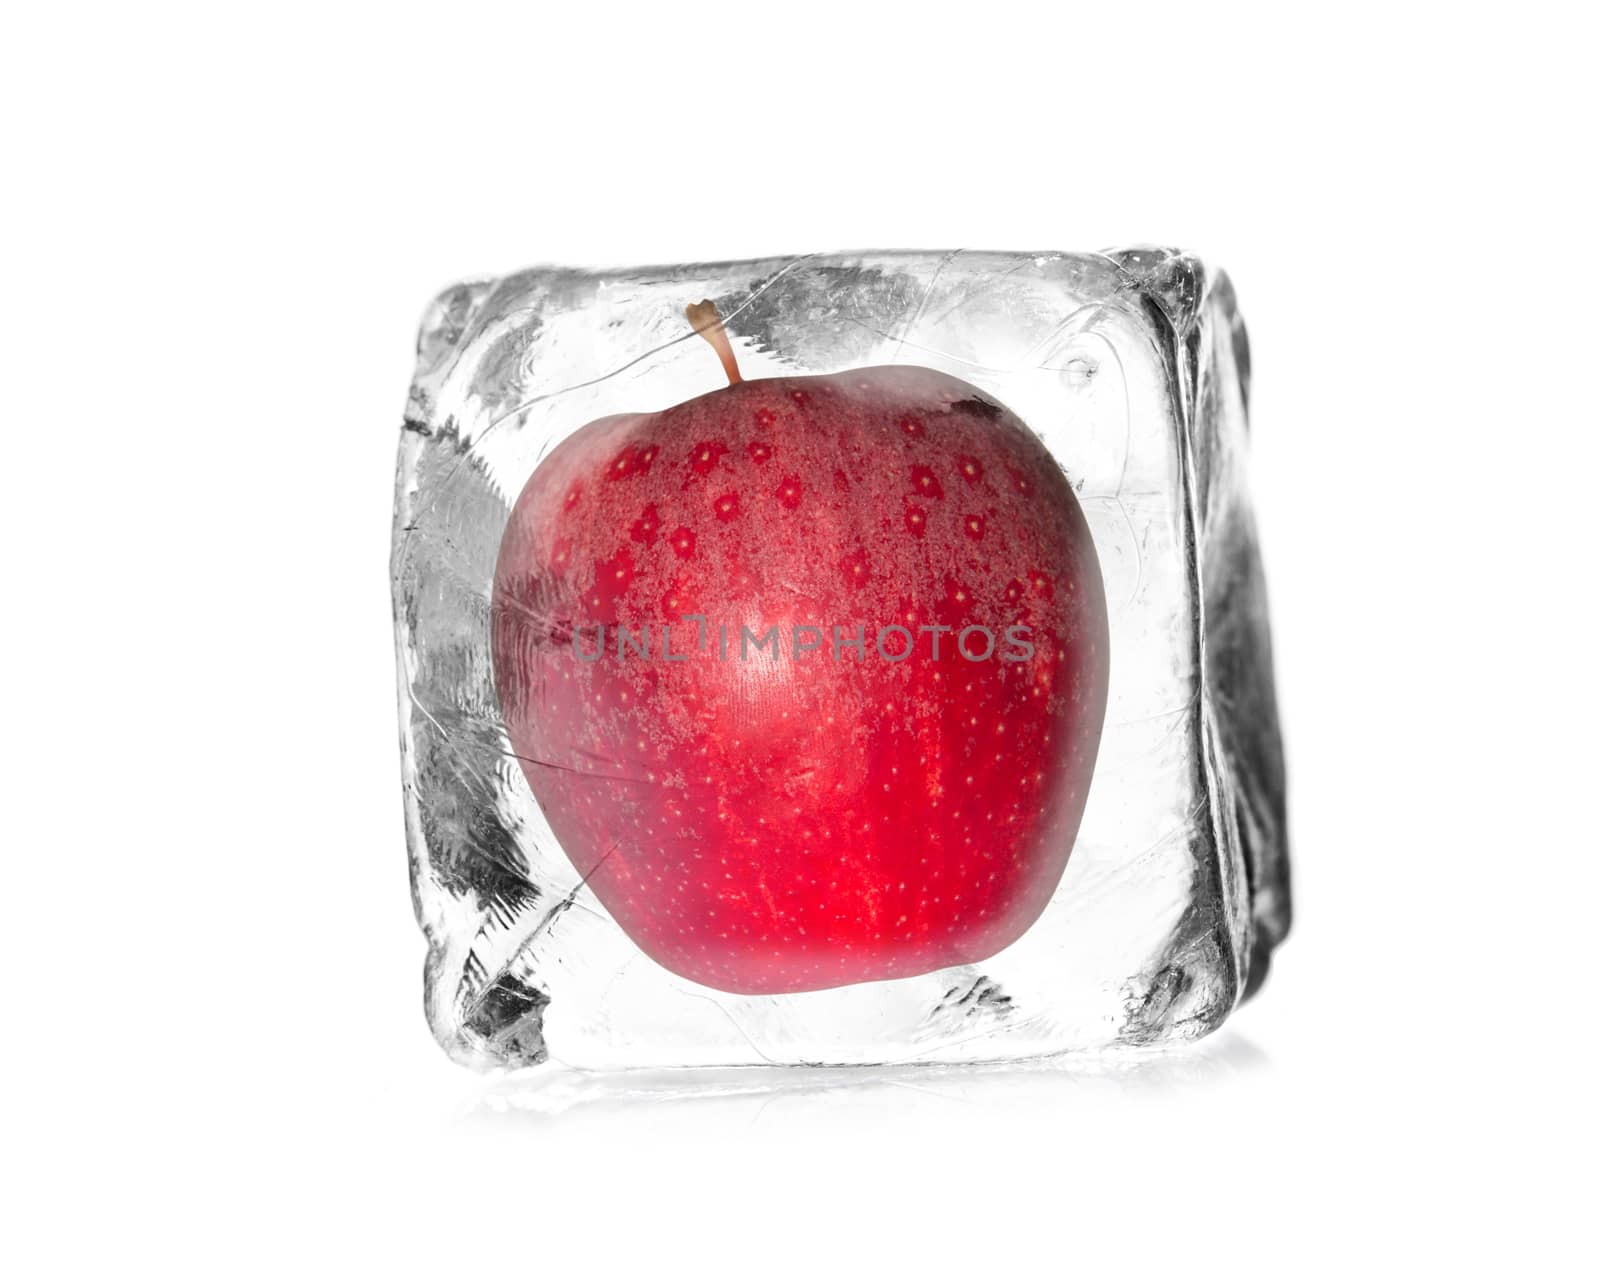 apple in ice cube by Tomjac1980